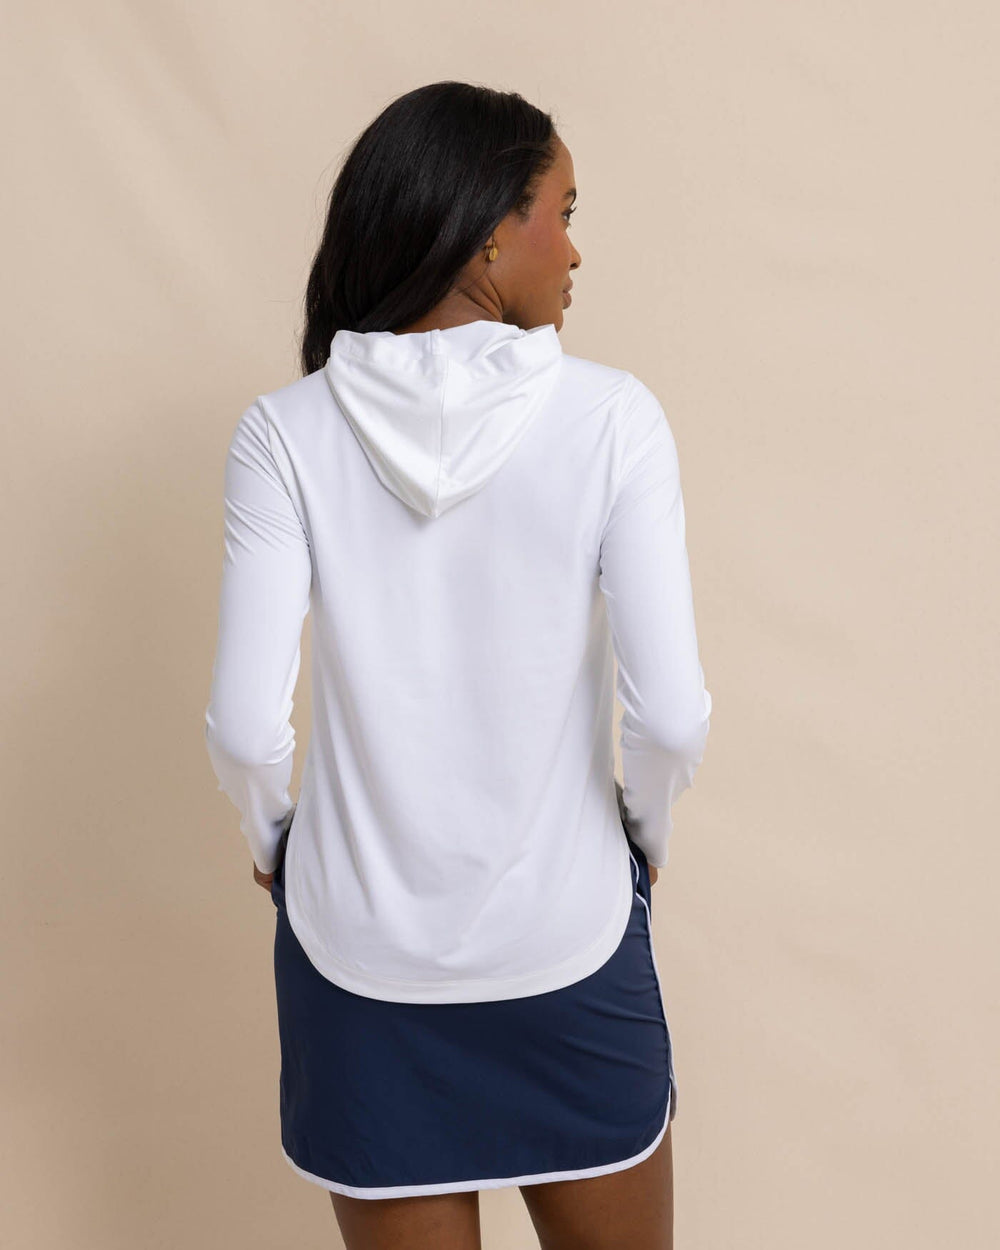 The back view of the Southern Tide Linley brrr illiant Performance Hoodie by Southern Tide - Classic White